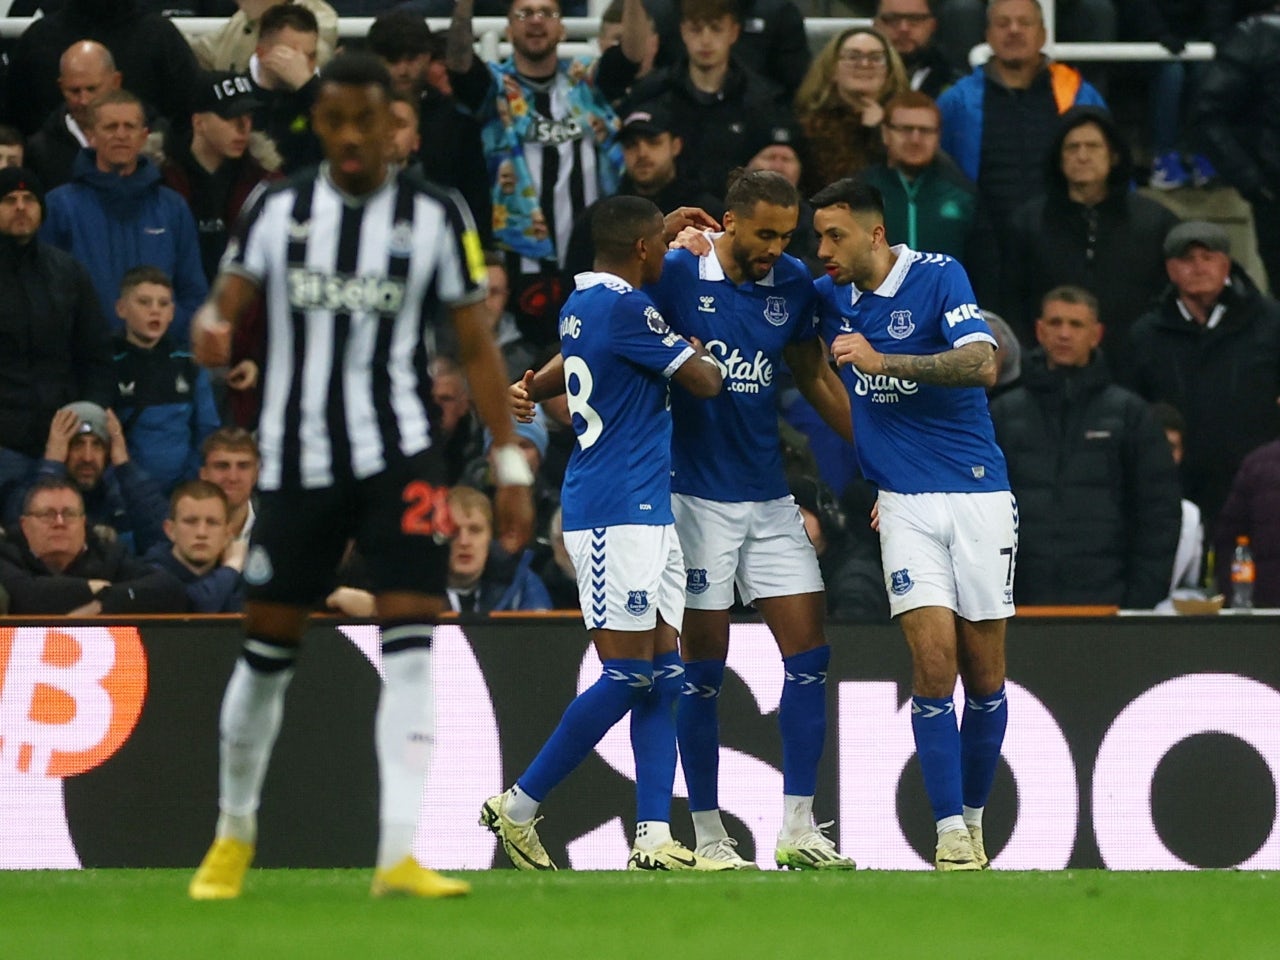 Dominic Calvert-Lewin ends goal drought to rescue point for Everton at Newcastle United